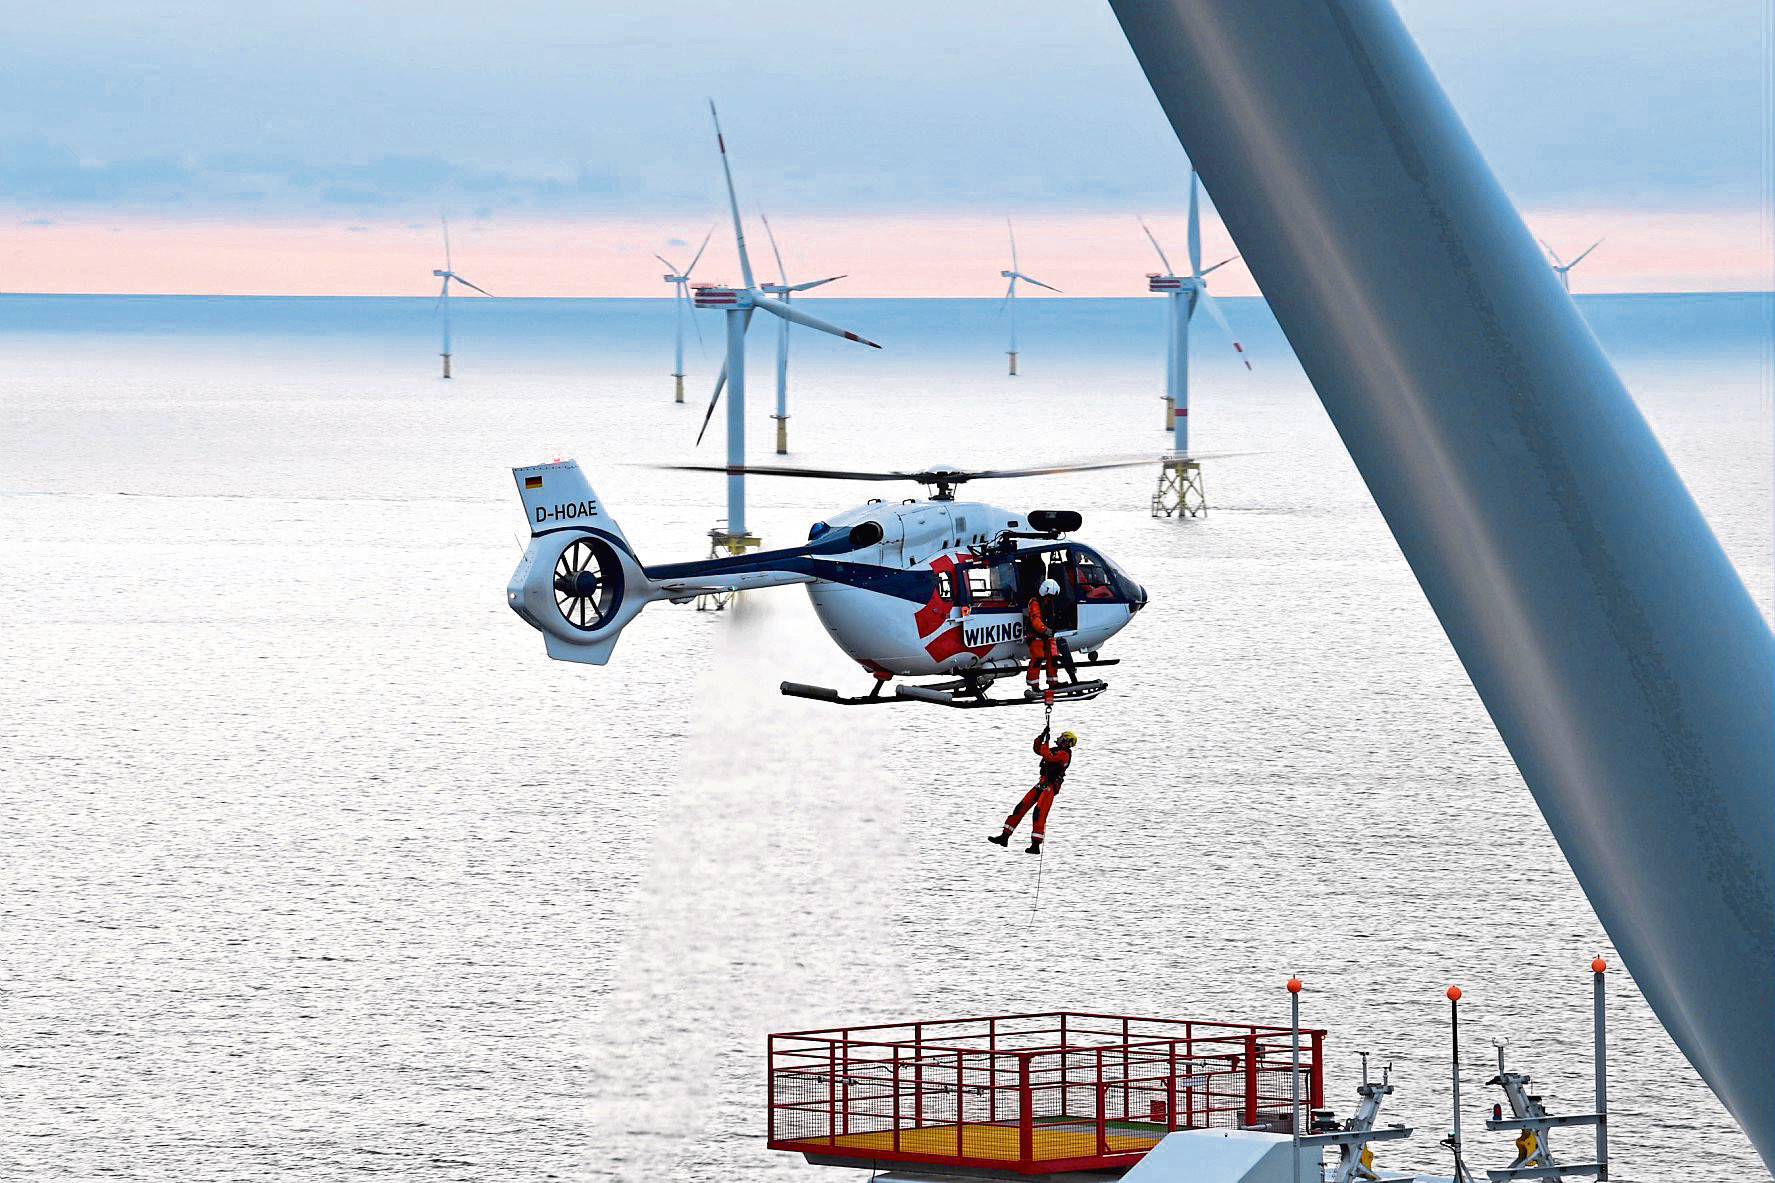 Airbus Helicopters is targeting the offshore wind market

submitted pic